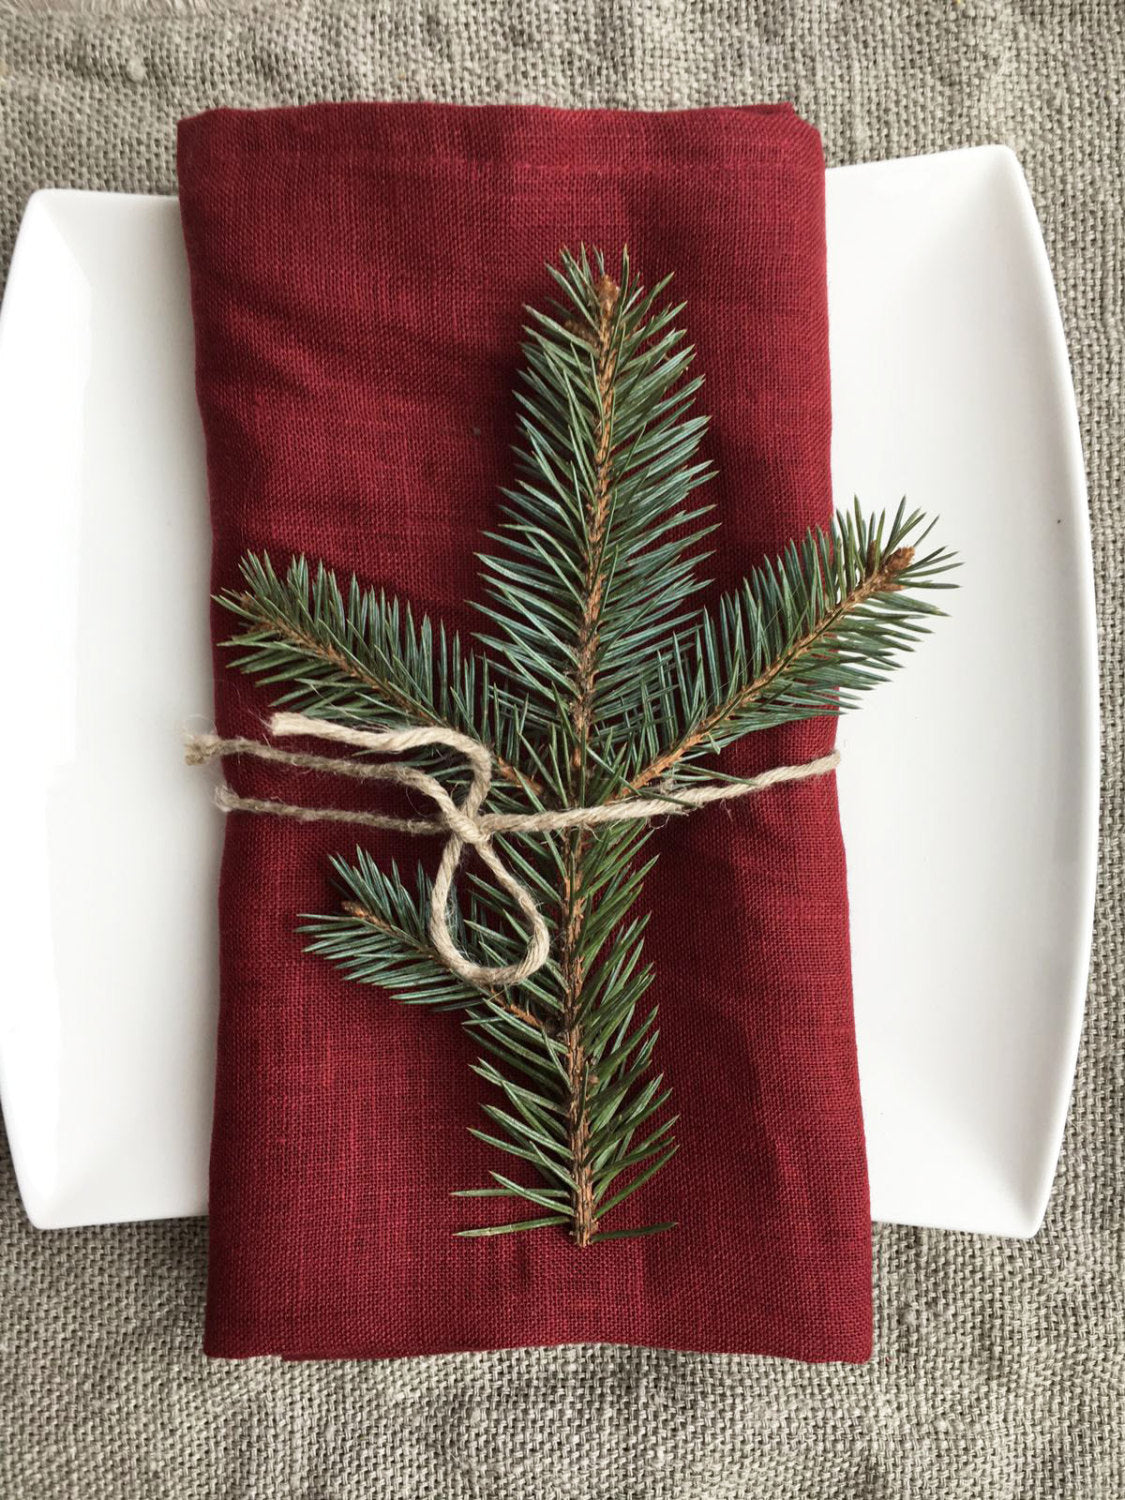 Red Linen Table Napkins, Christmas Table Accessories, Dinner